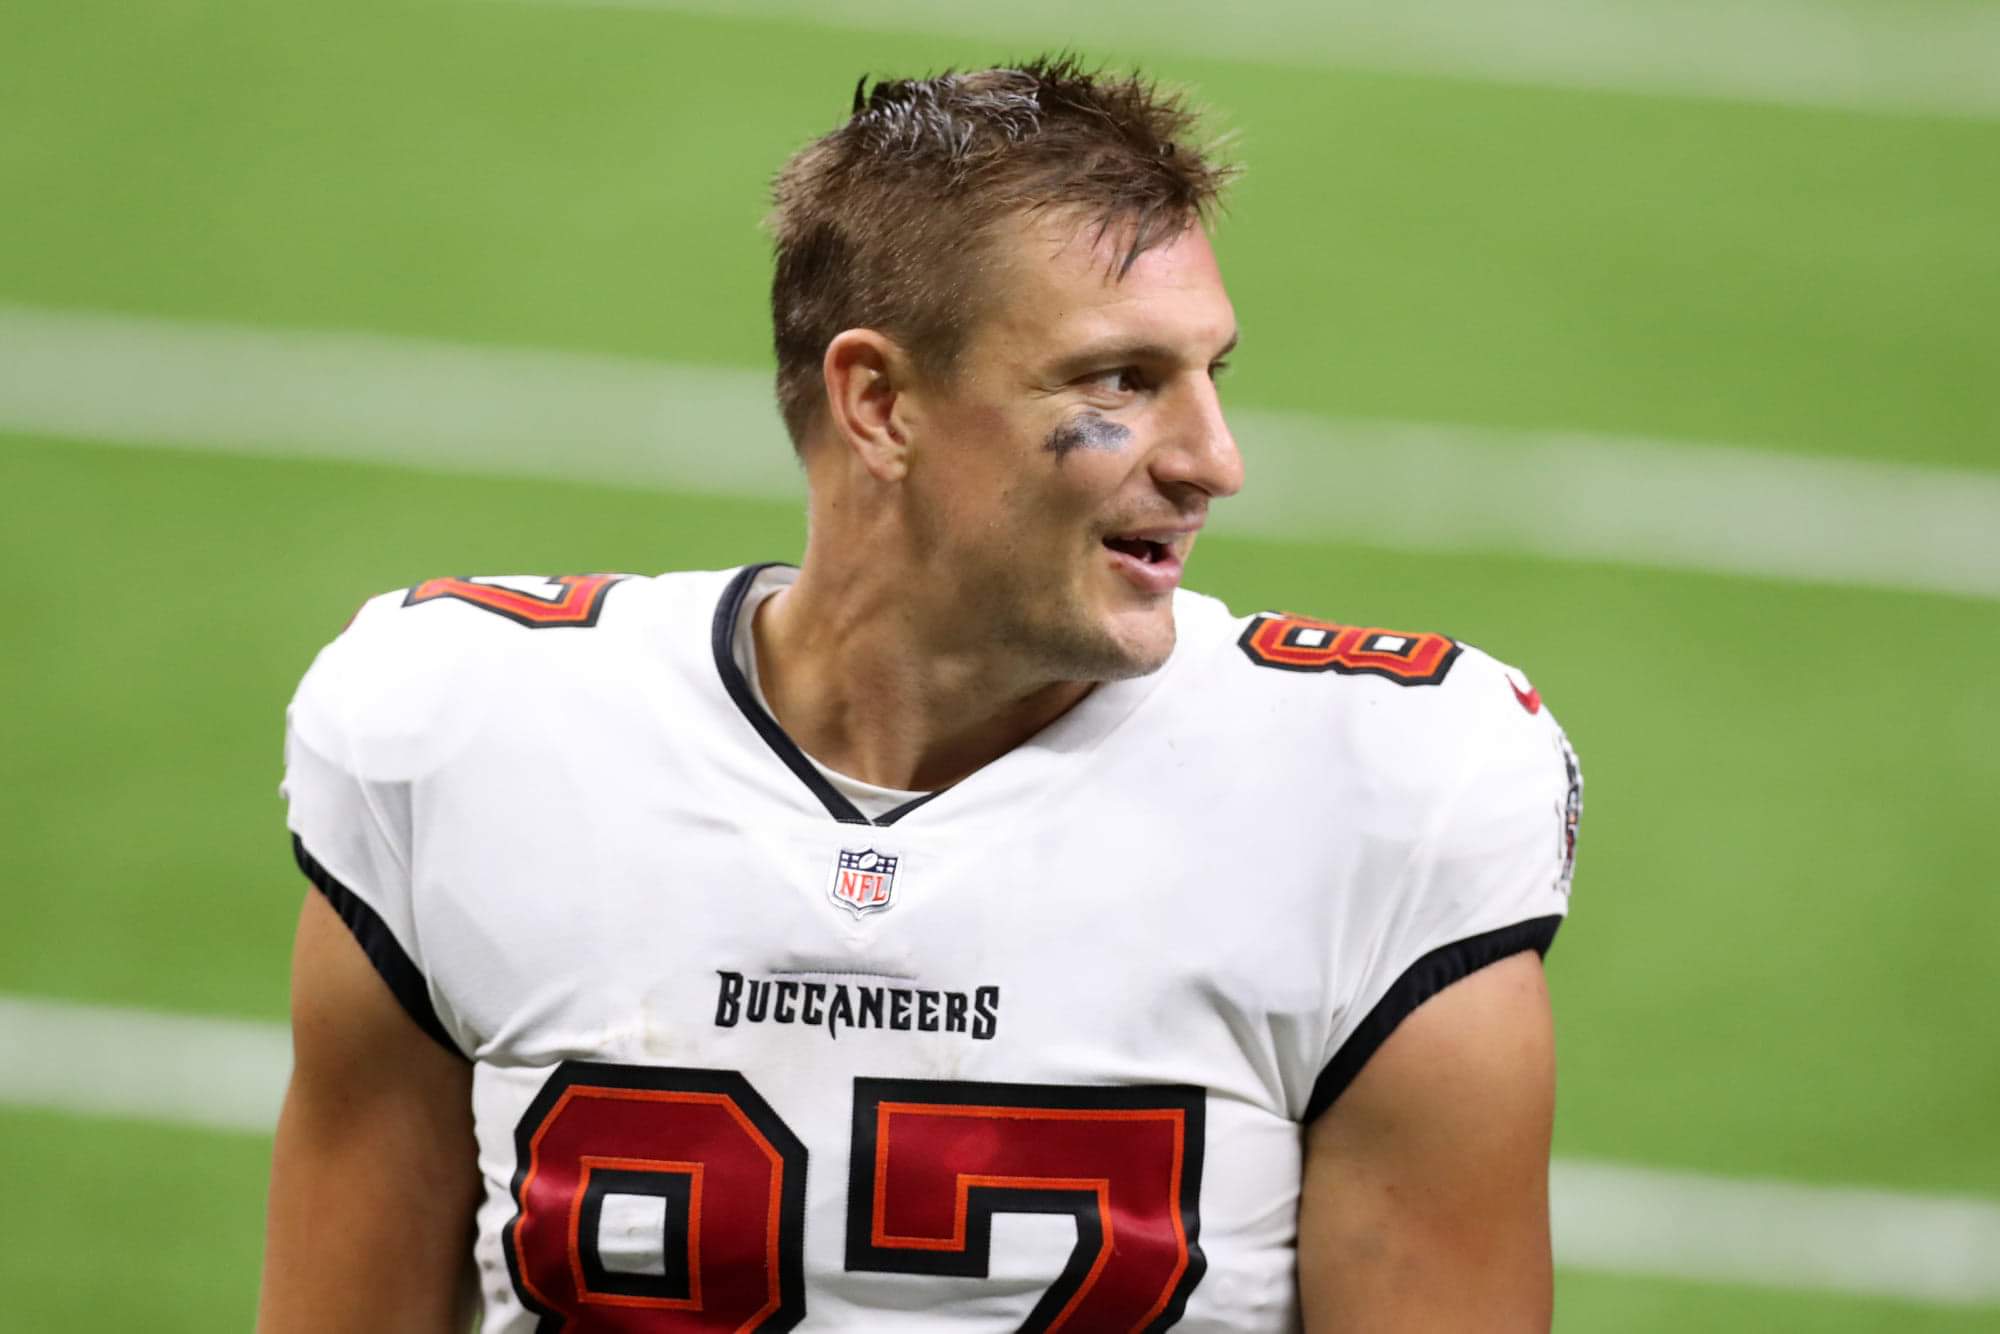 Buccaneers' tight end Rob Gronkowski/via Getty Images